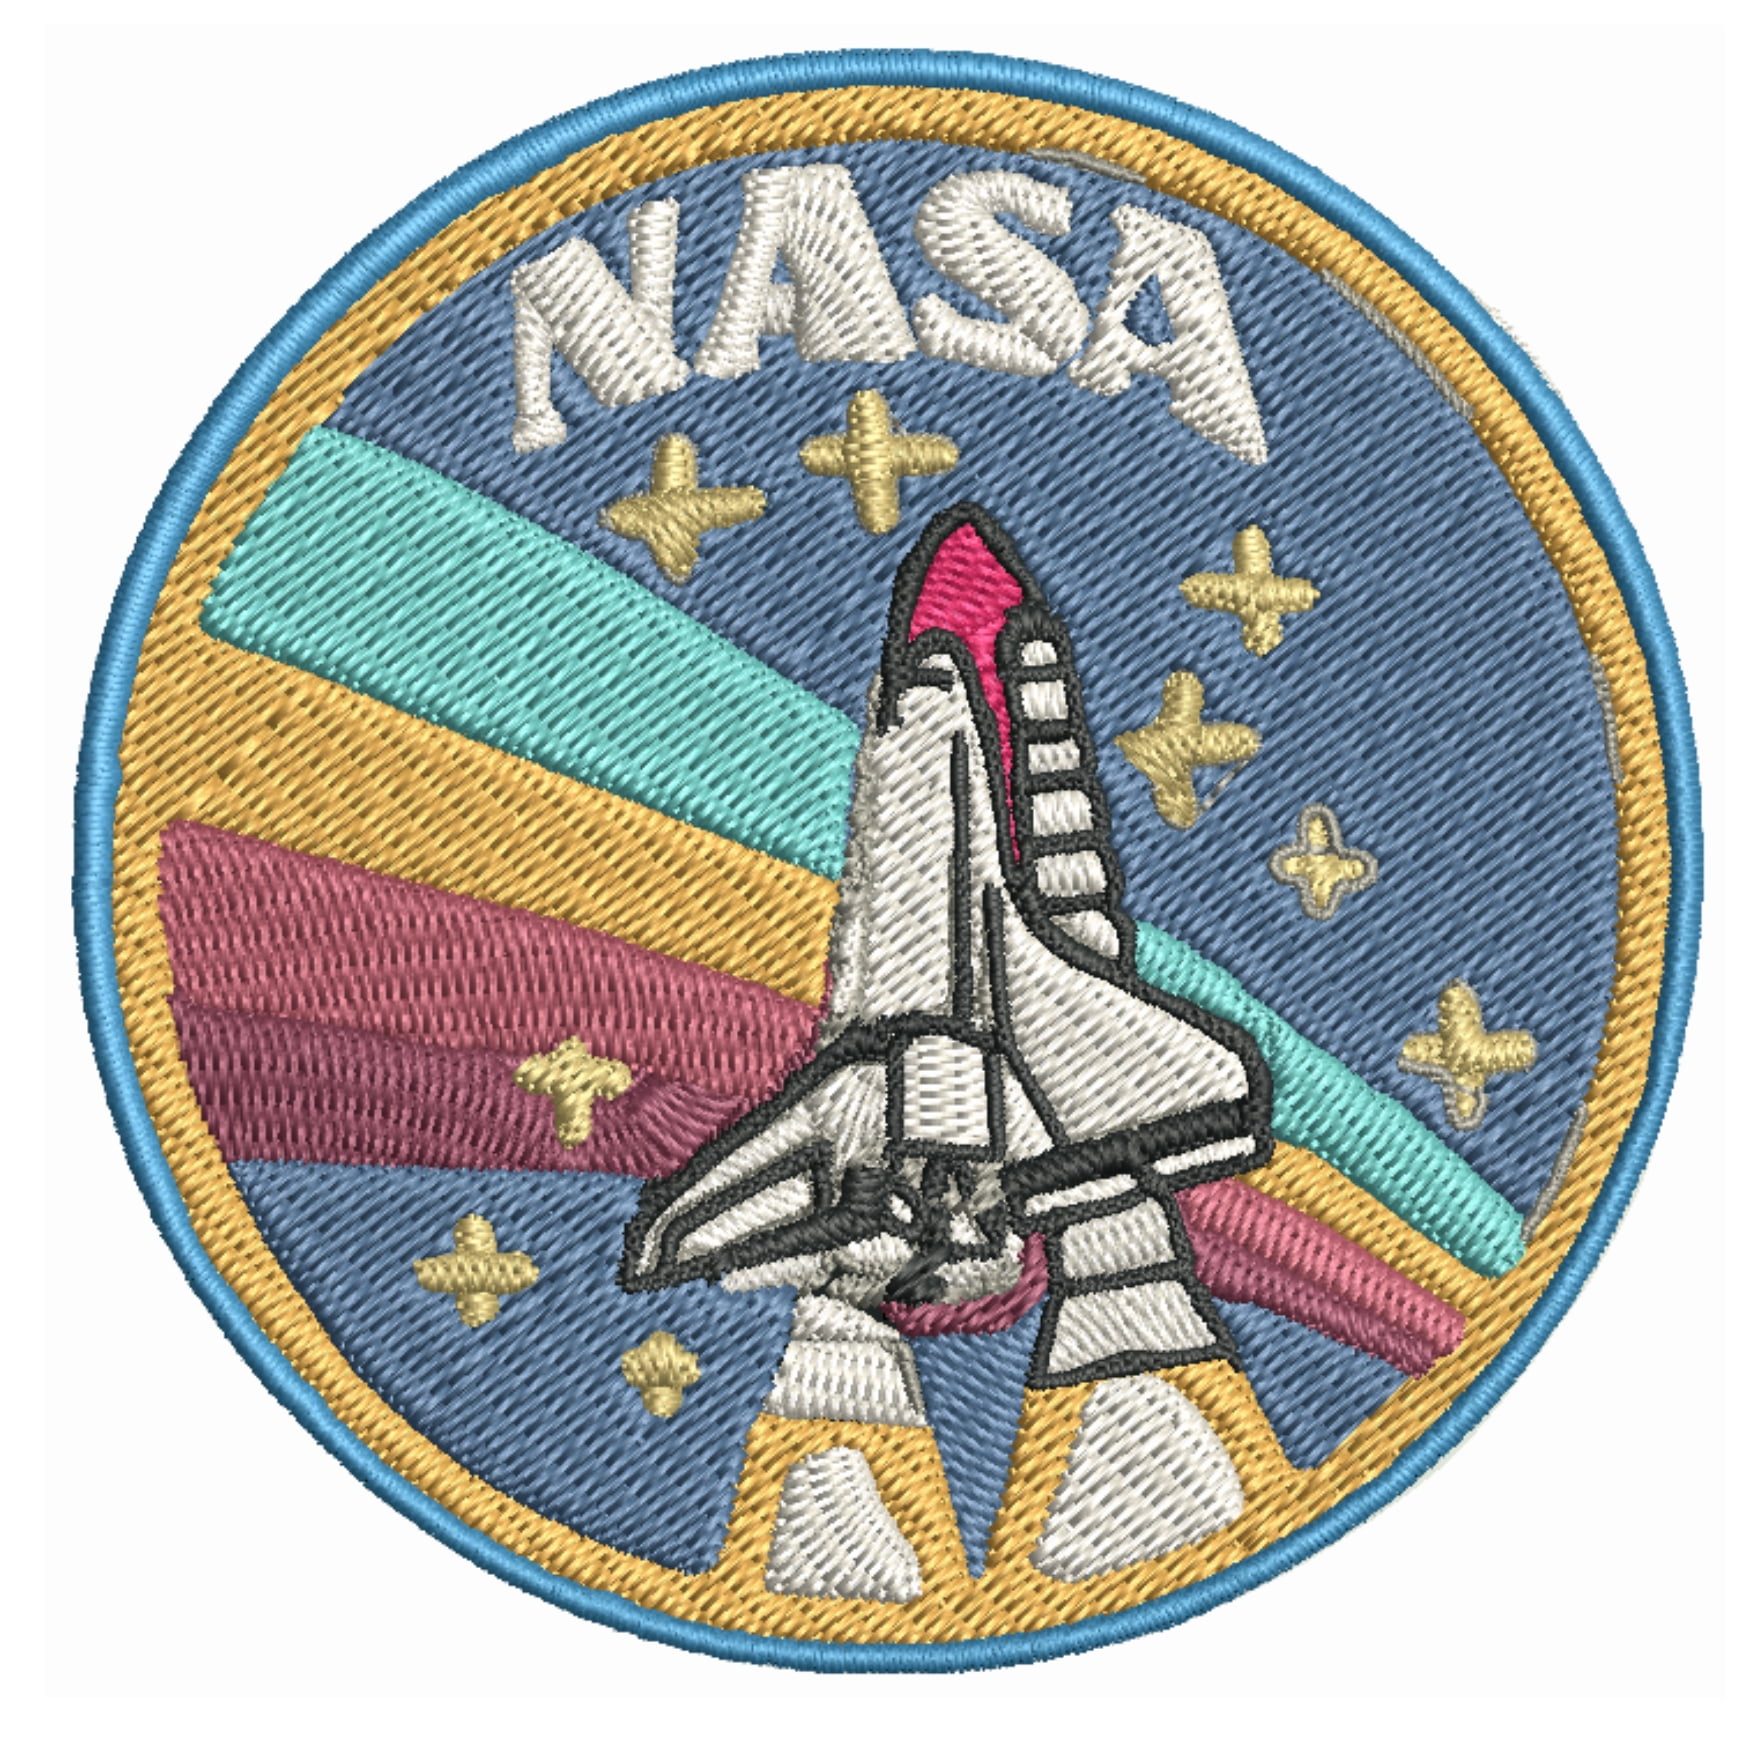 Nasa Logo Astronaut Patch Embroidered Sew on Iron on Patch Badge DIY  Costume Aeronautics Space Administration Demogorgon Patches DP 